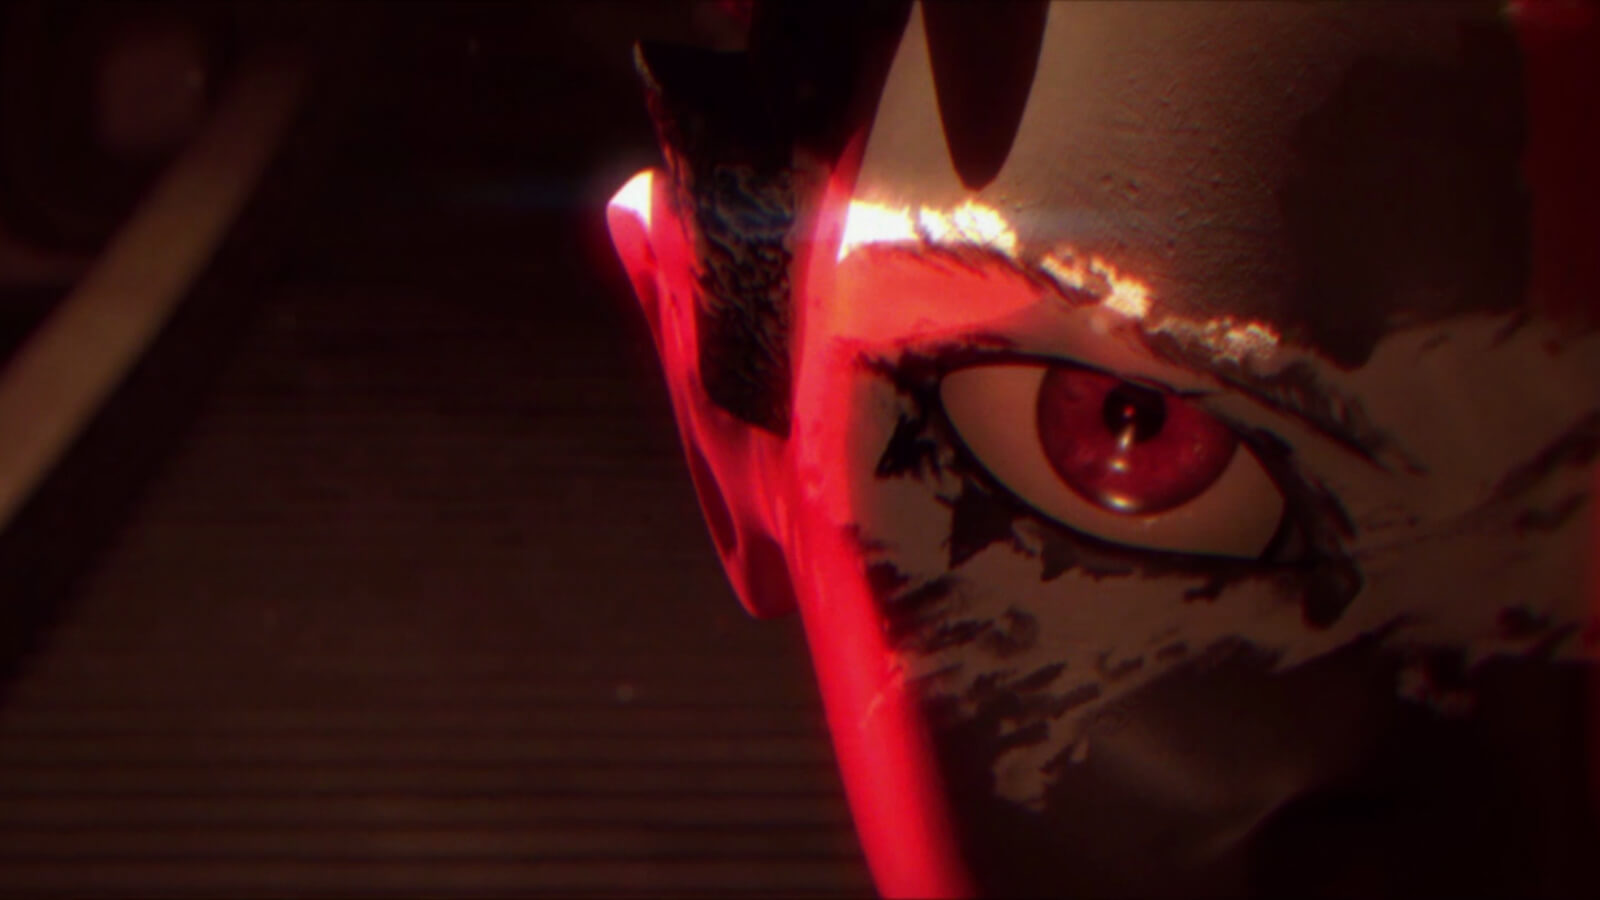 Extreme close up of a face on the right half of the image, including an eye and ear lit by red light